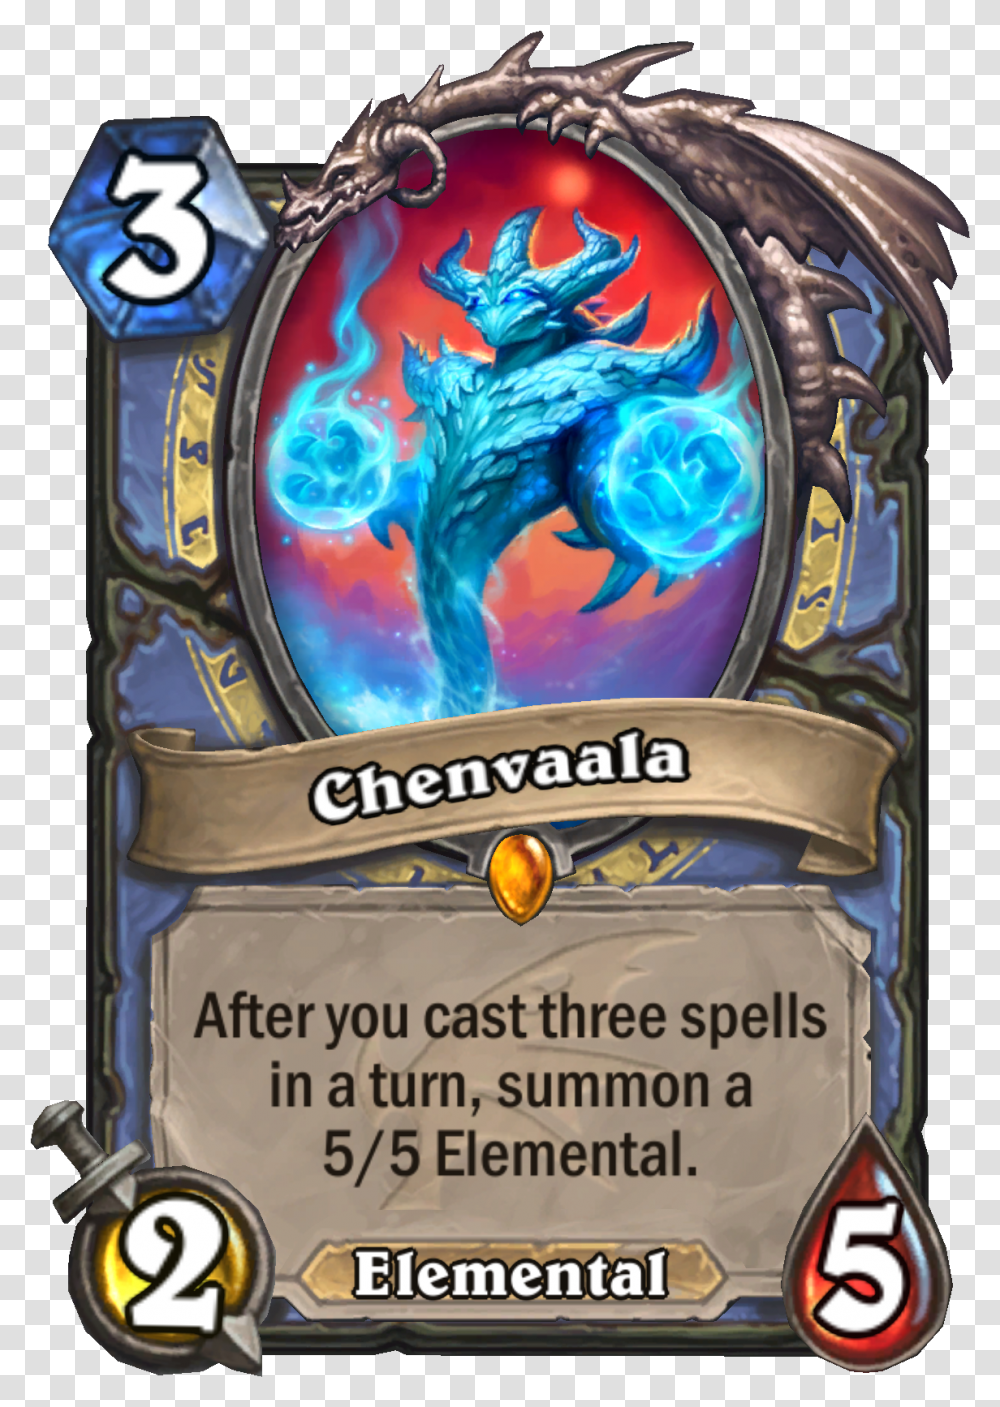 Chenvaala Is Ice Cold Descent Of Dragons Legendaries, Arcade Game Machine, Performer, Paintball Transparent Png